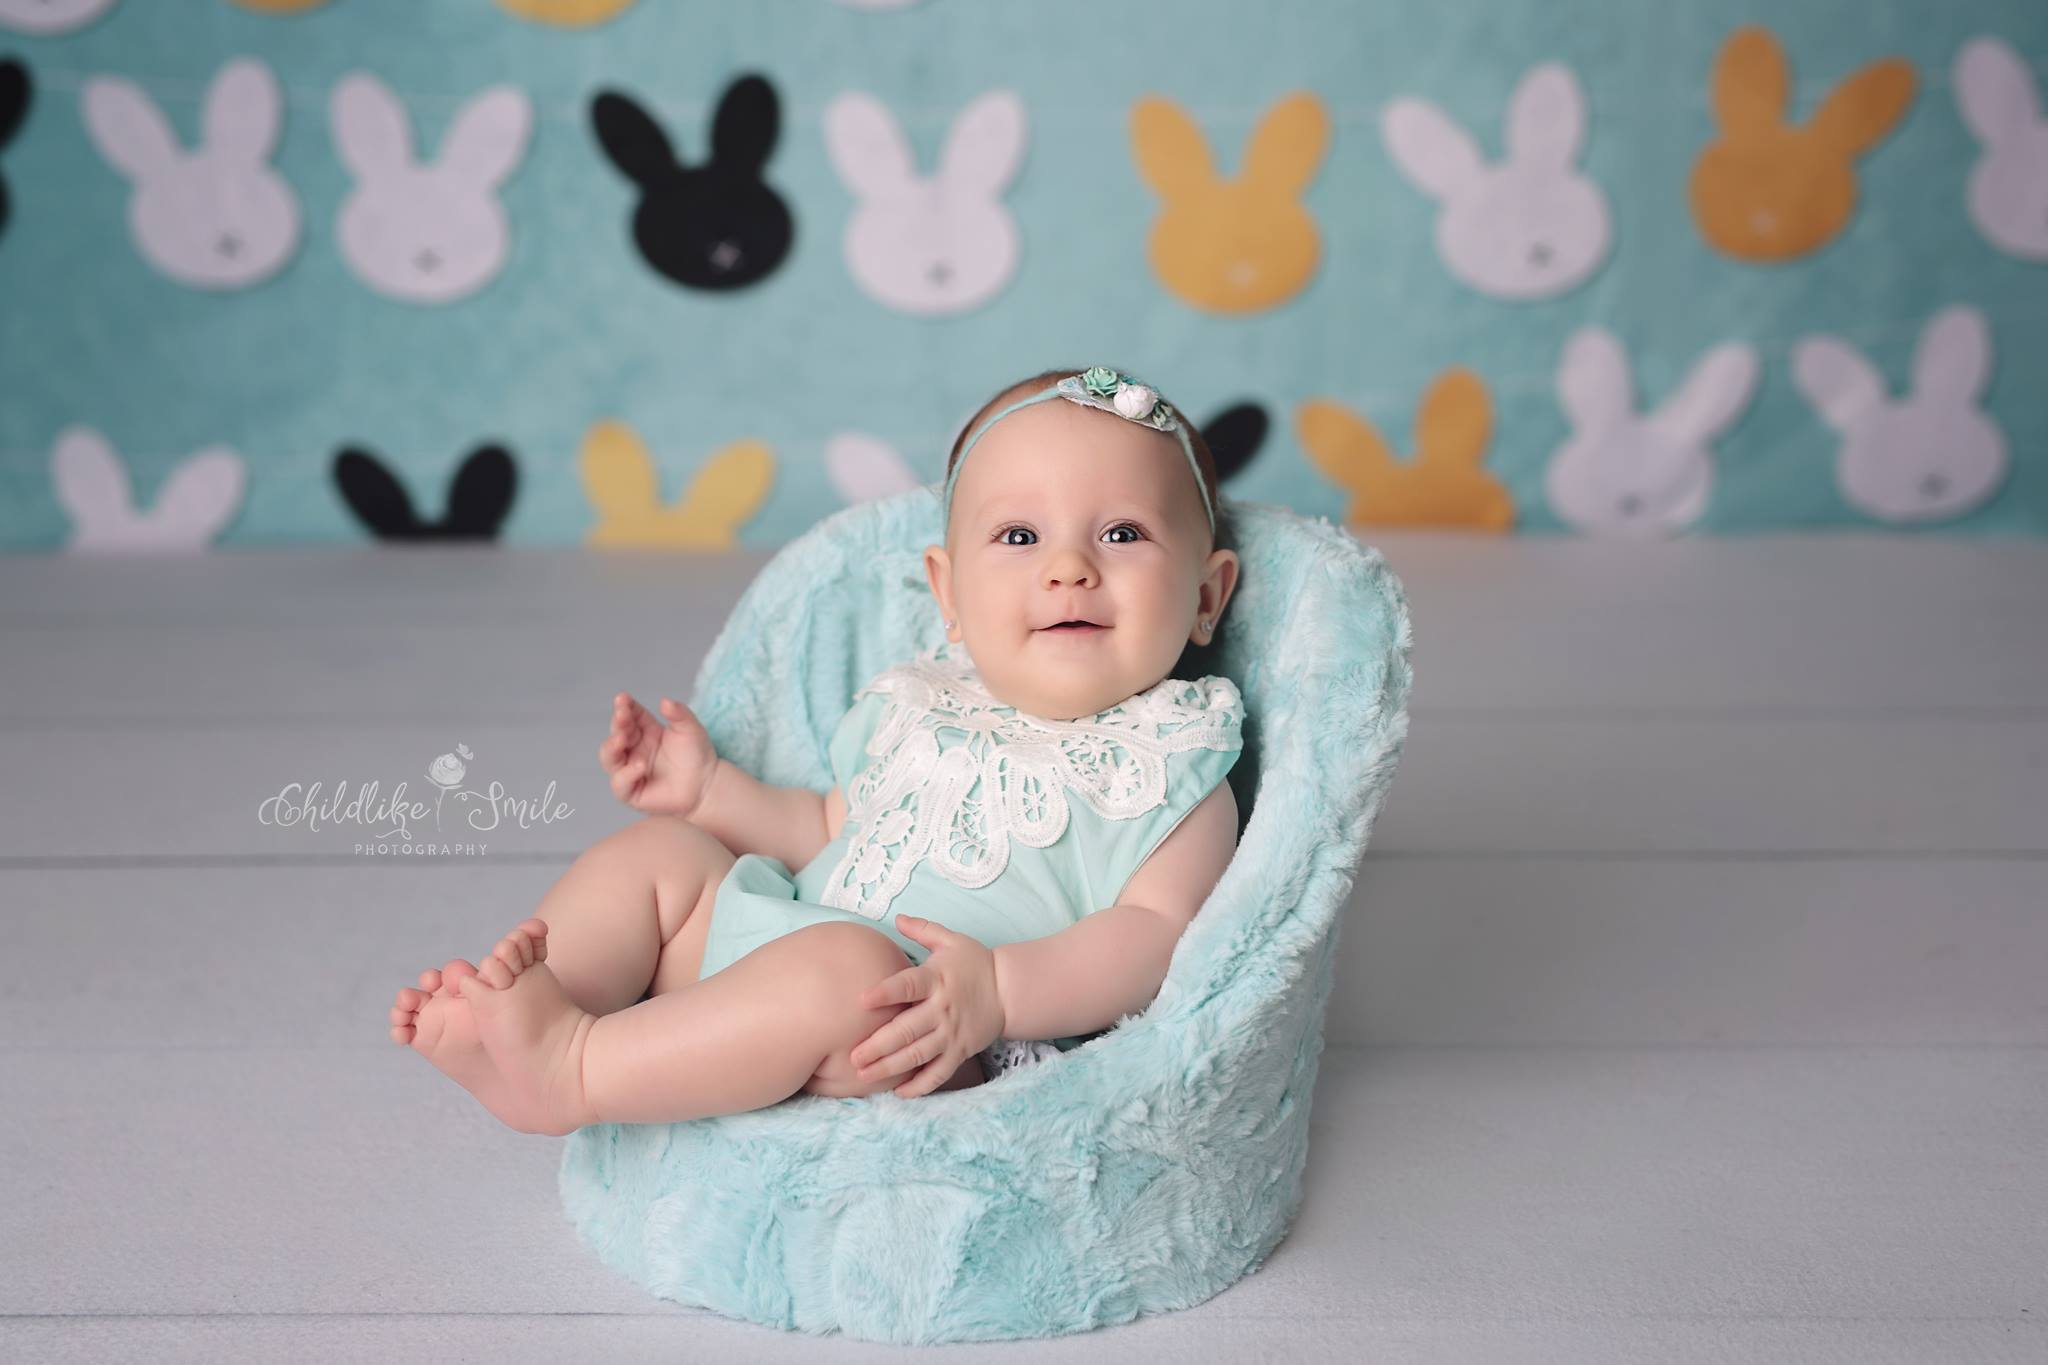 Kate Rabbits Easter Backdrop for Photography designed by Jerry_Sina